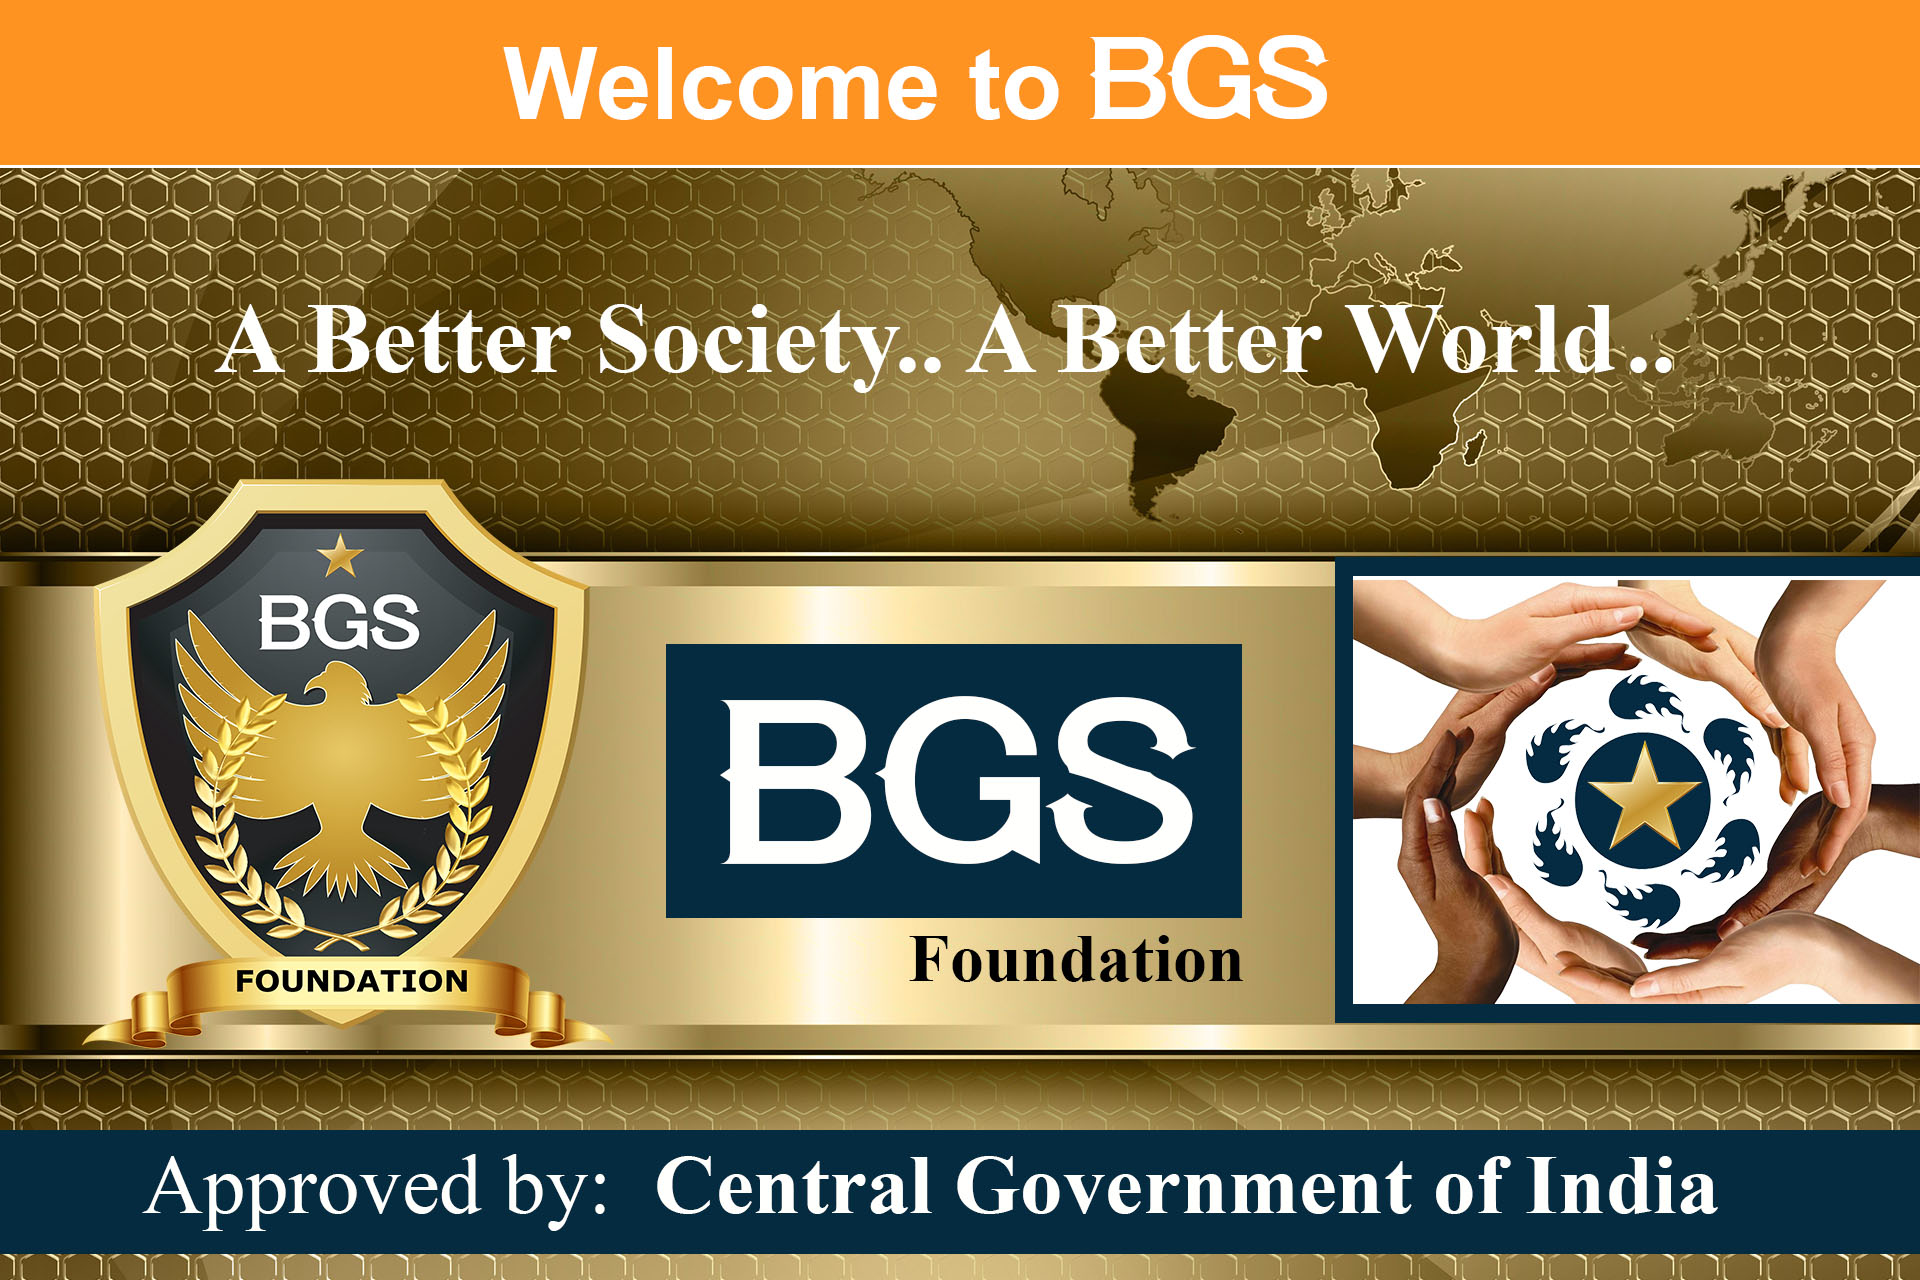 BGS Foundation - about bgs foundation